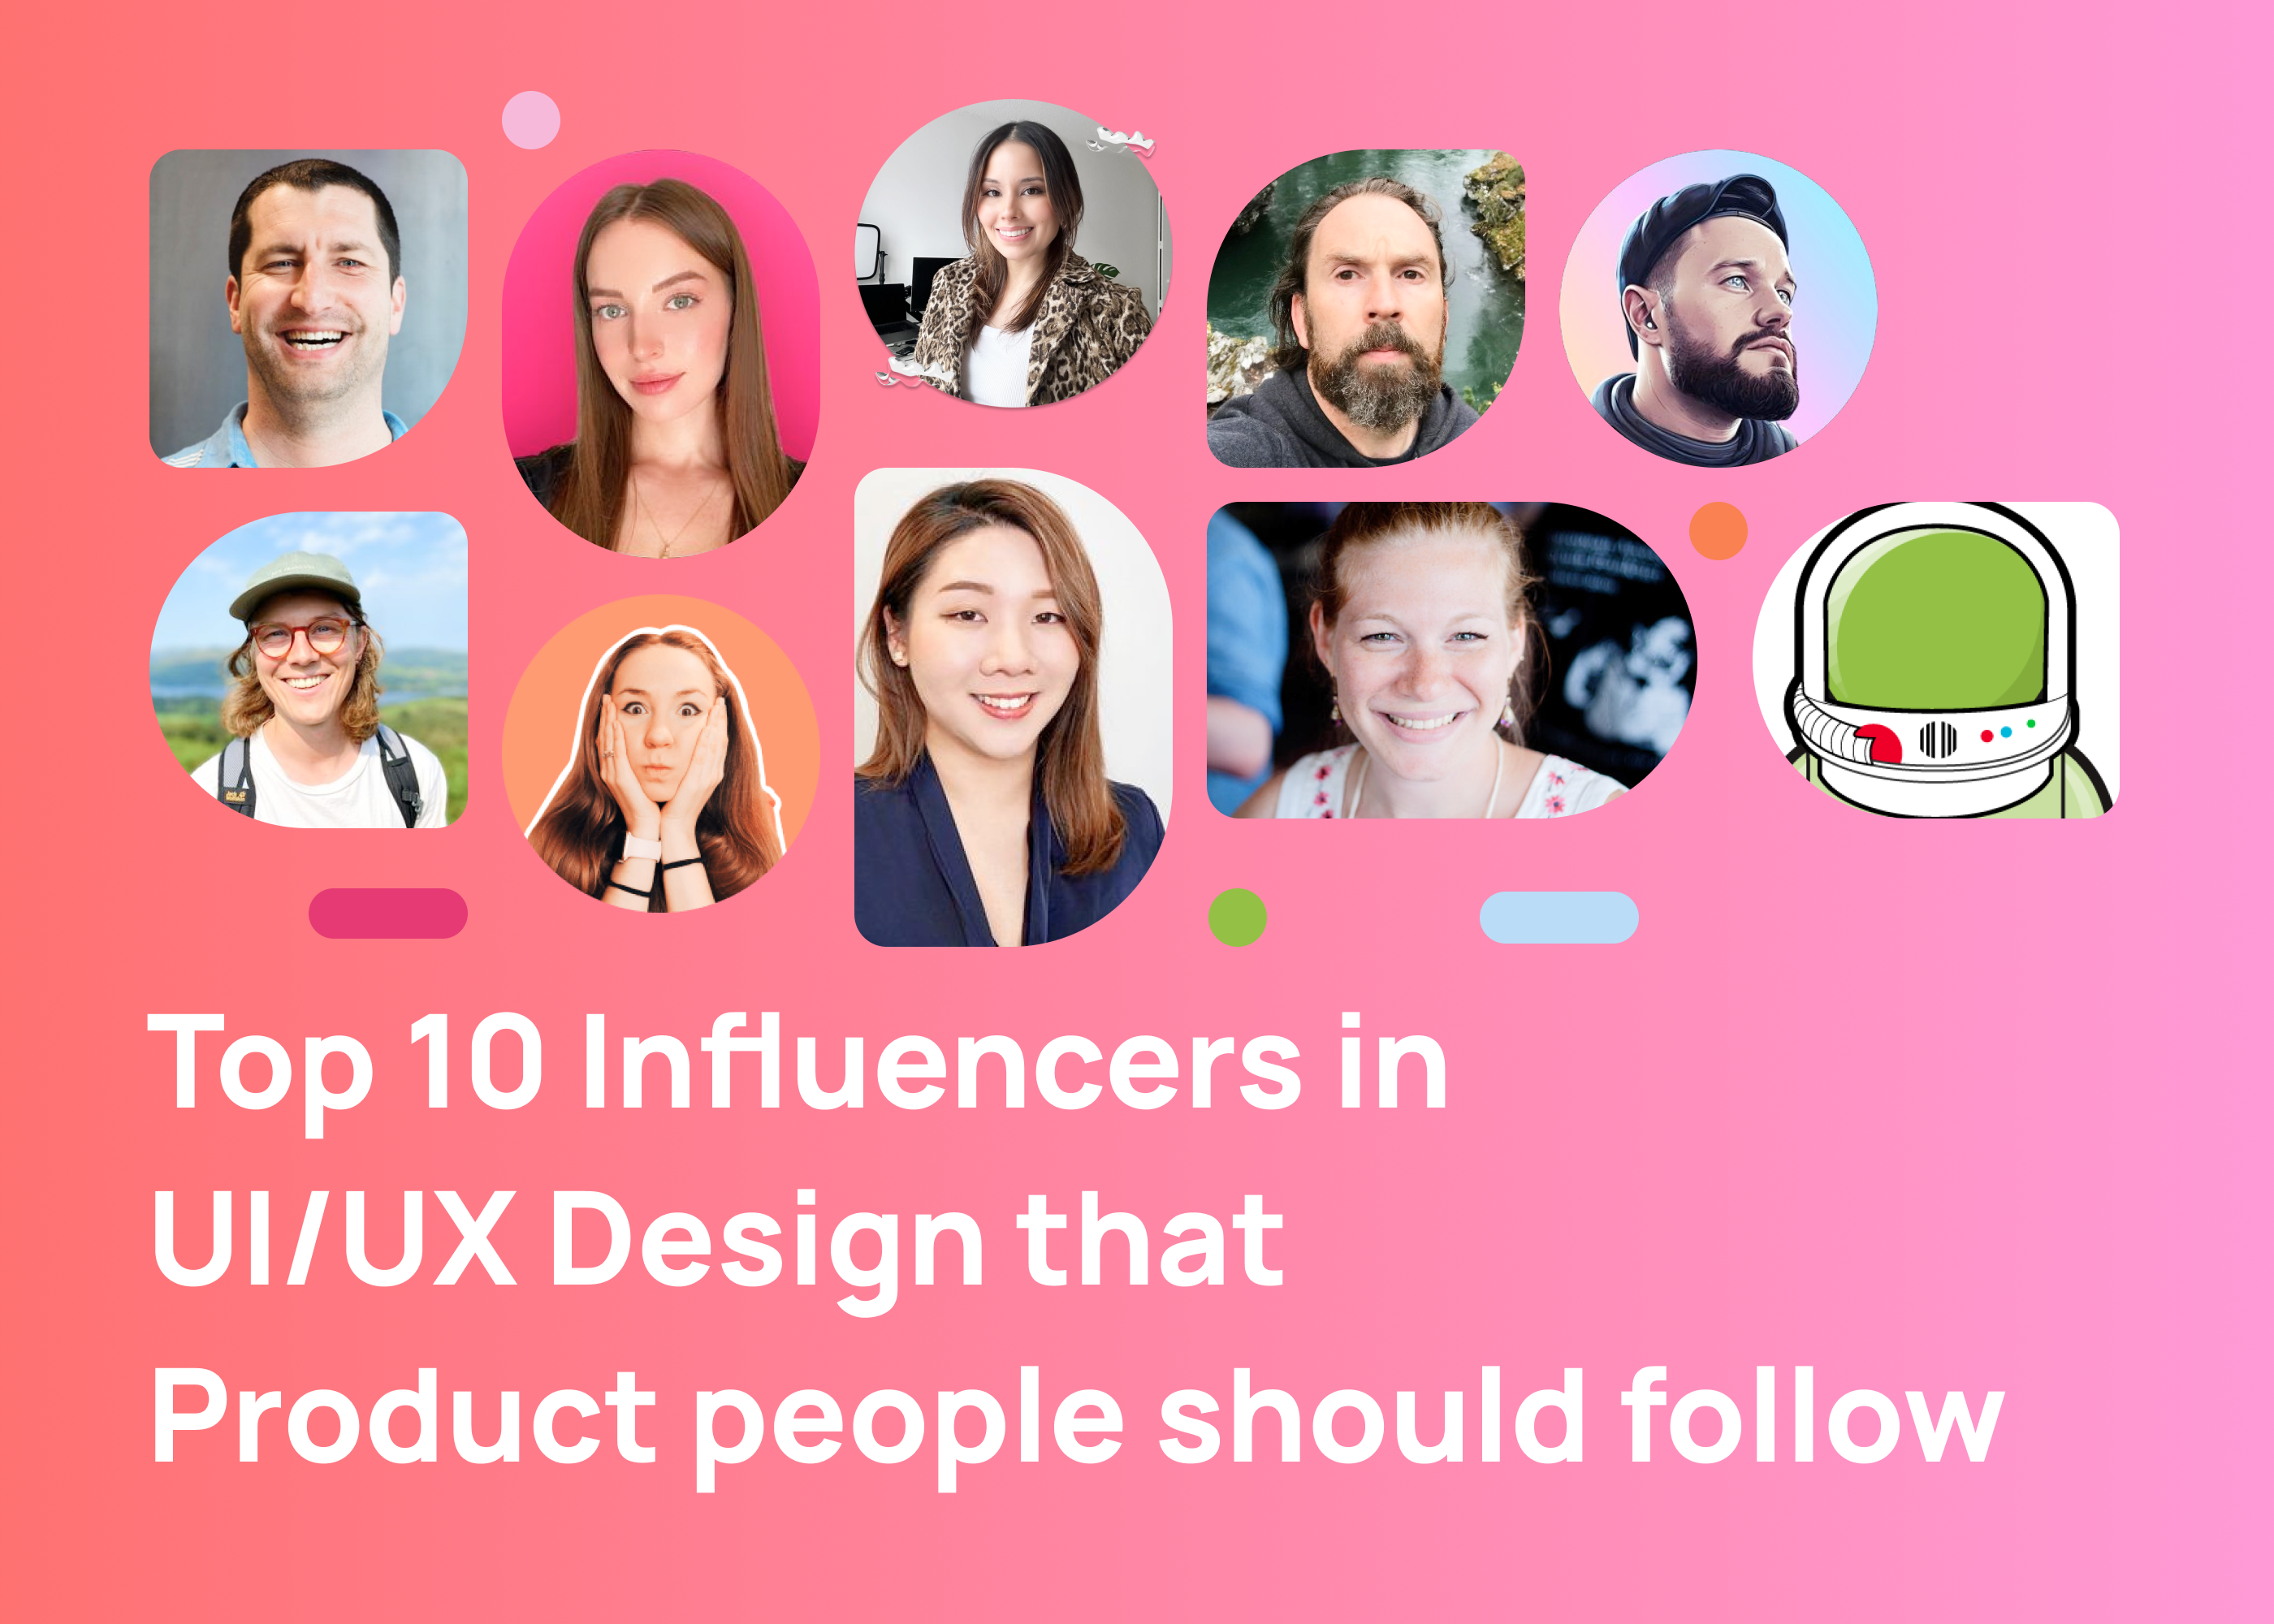 Top 10 Influencers in UI/UX design Product people should follow